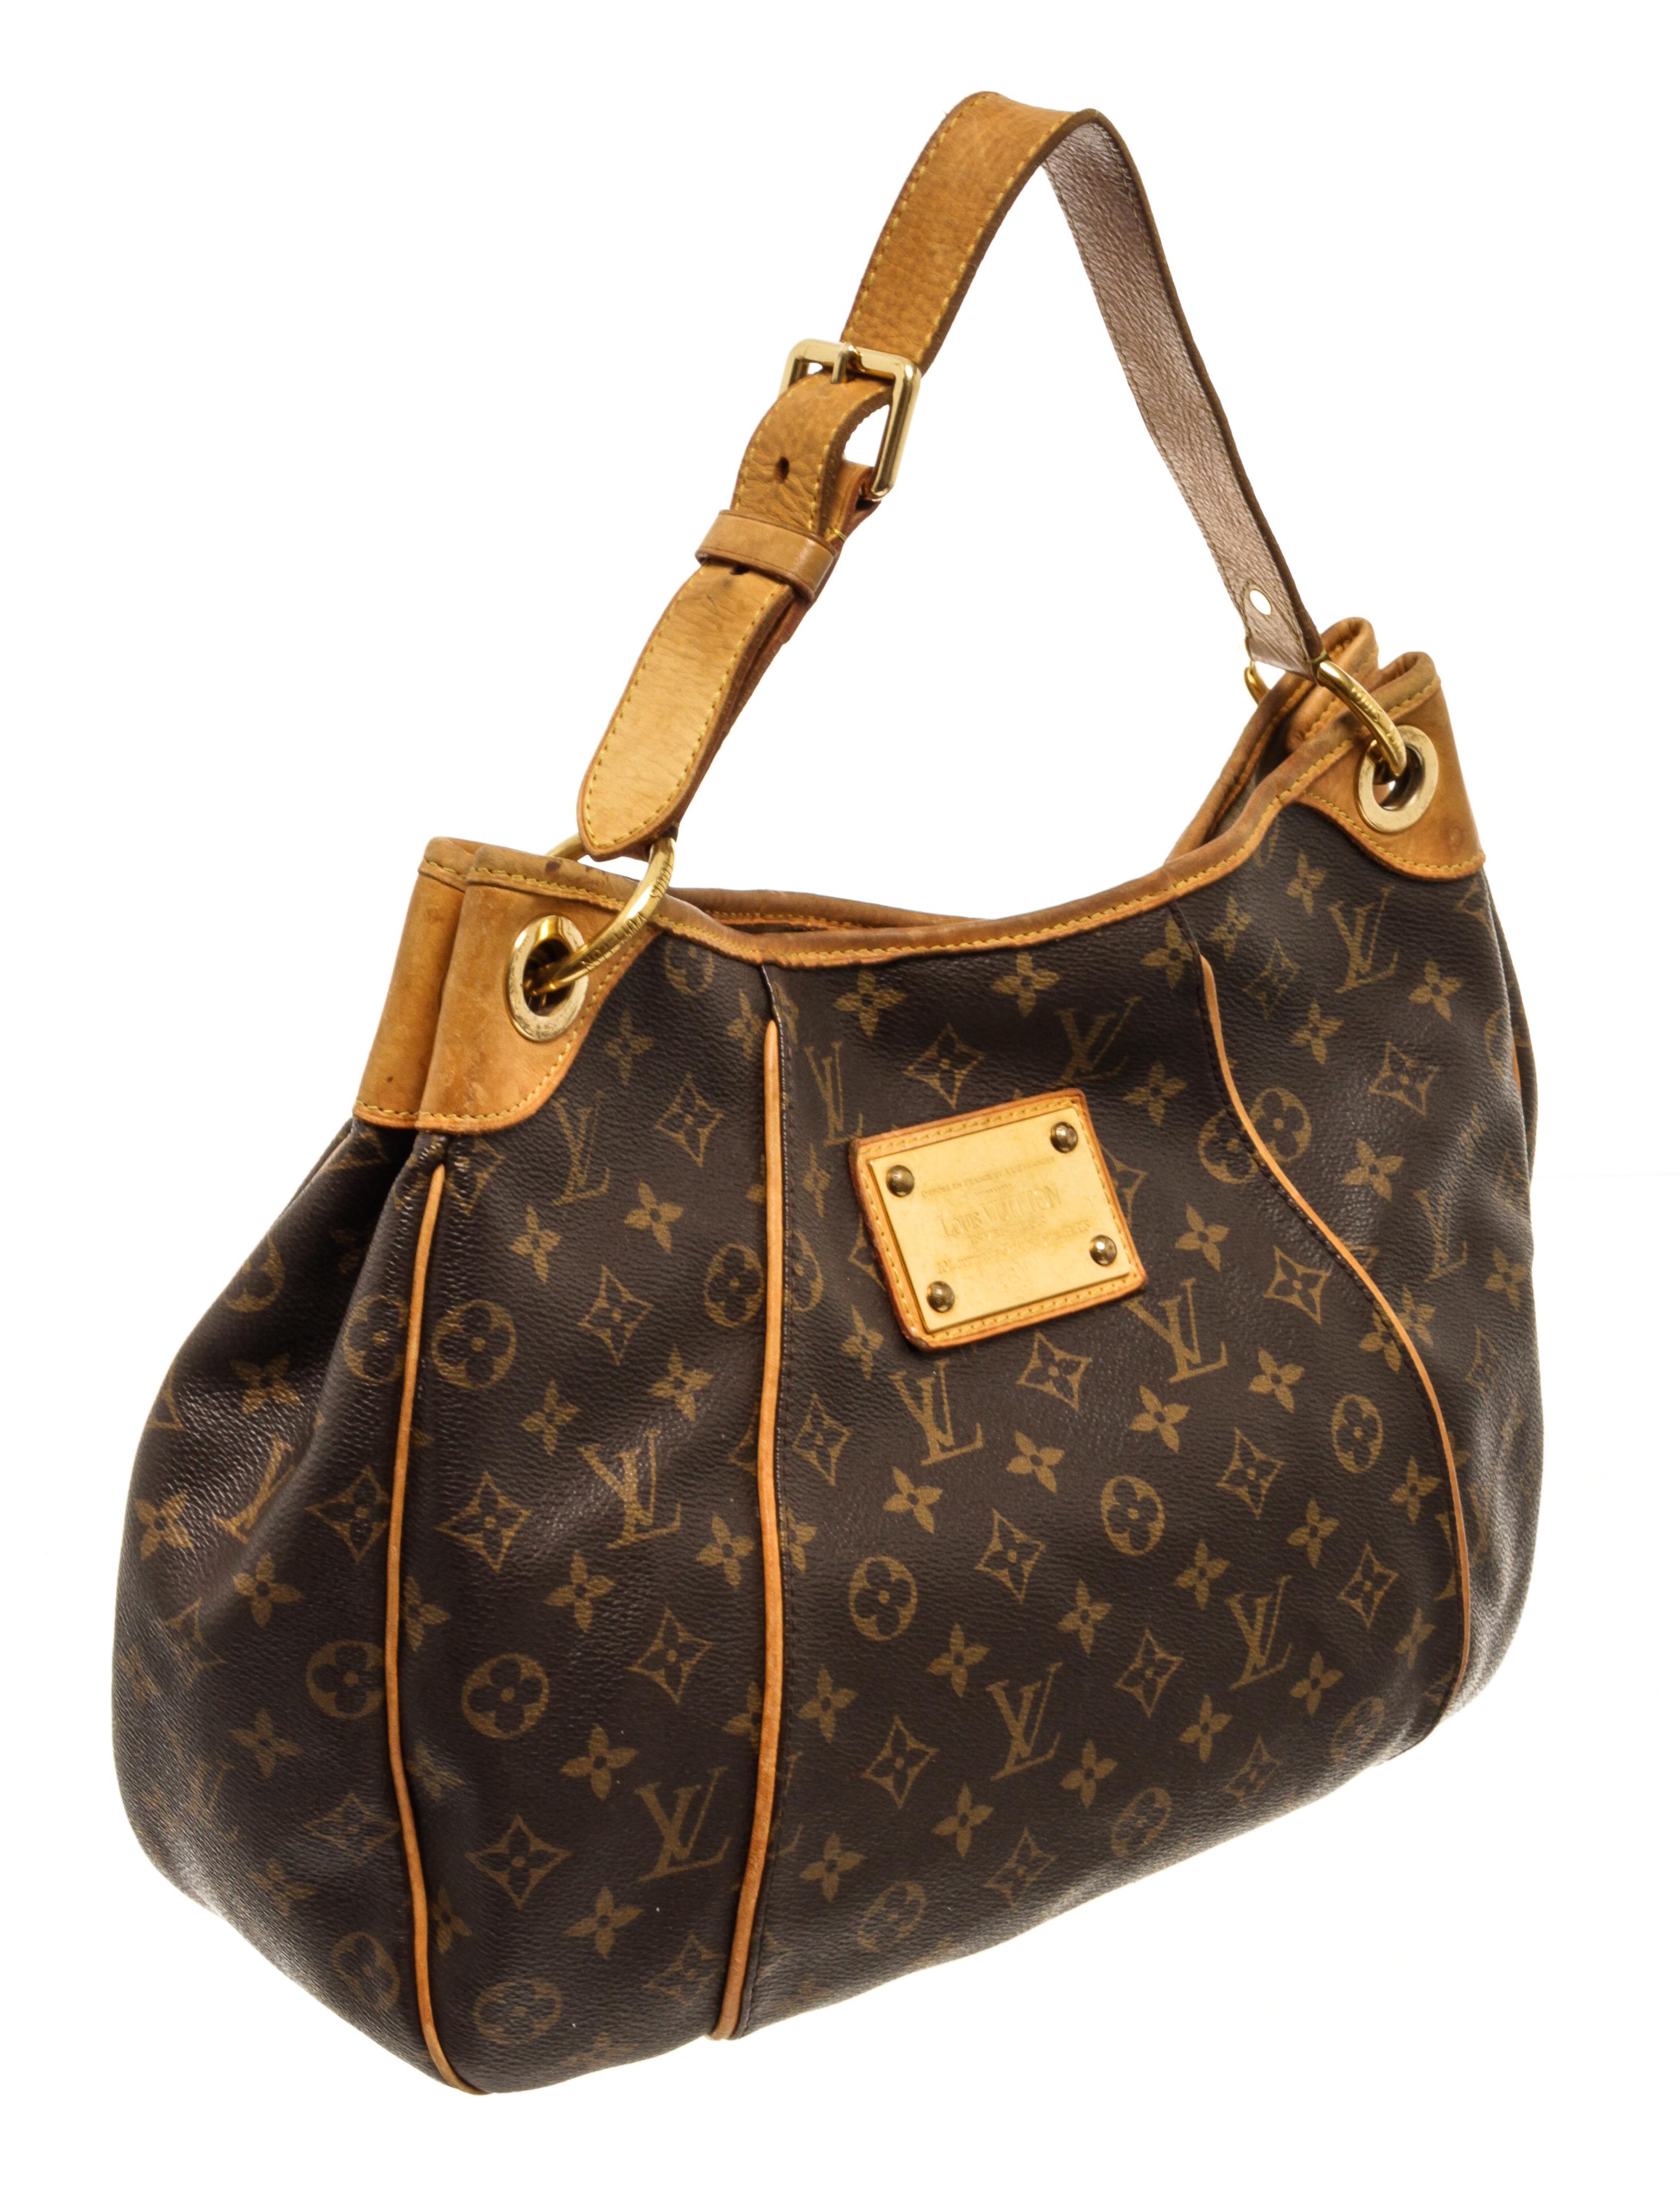 Louis Vuitton Brown Monogram Canvas Galliera PM Hobo Bag with monogram canvas and leather, this bag features a single handle, a snap button closure, and gold tone hardware.

73005MSC